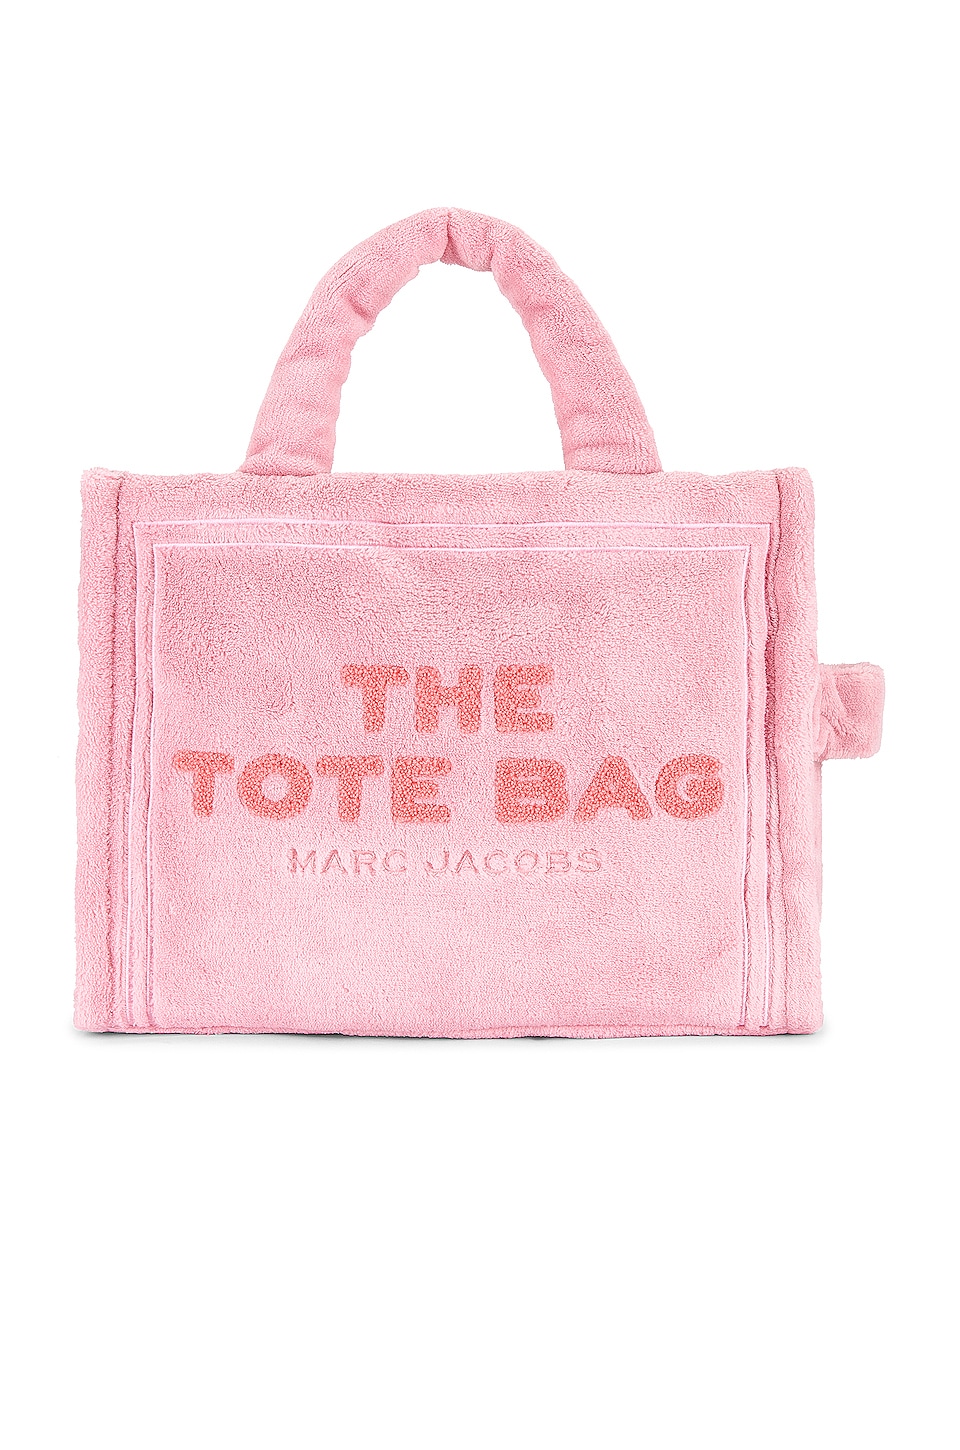 drivhus Aftensmad ven Marc Jacobs The Terry Medium Tote Bag in Light Pink | REVOLVE